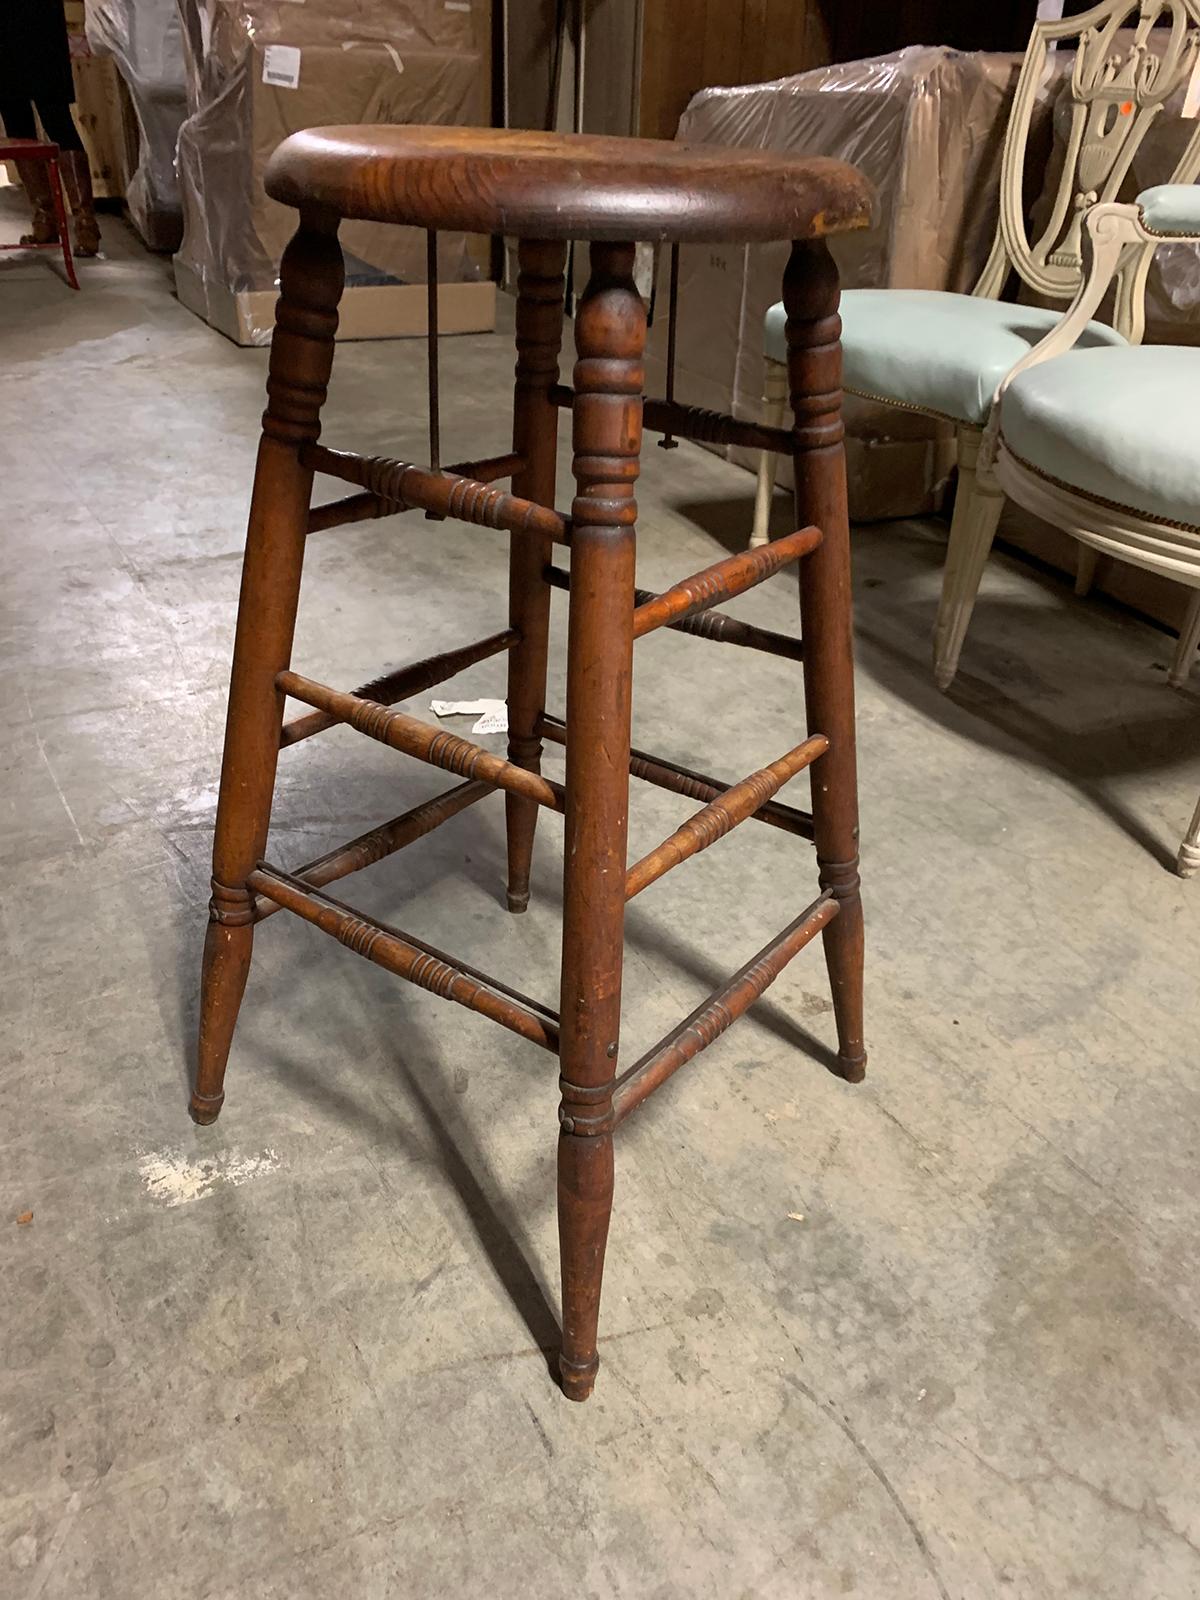 Late 19th-Early 20th Century American Stool 1